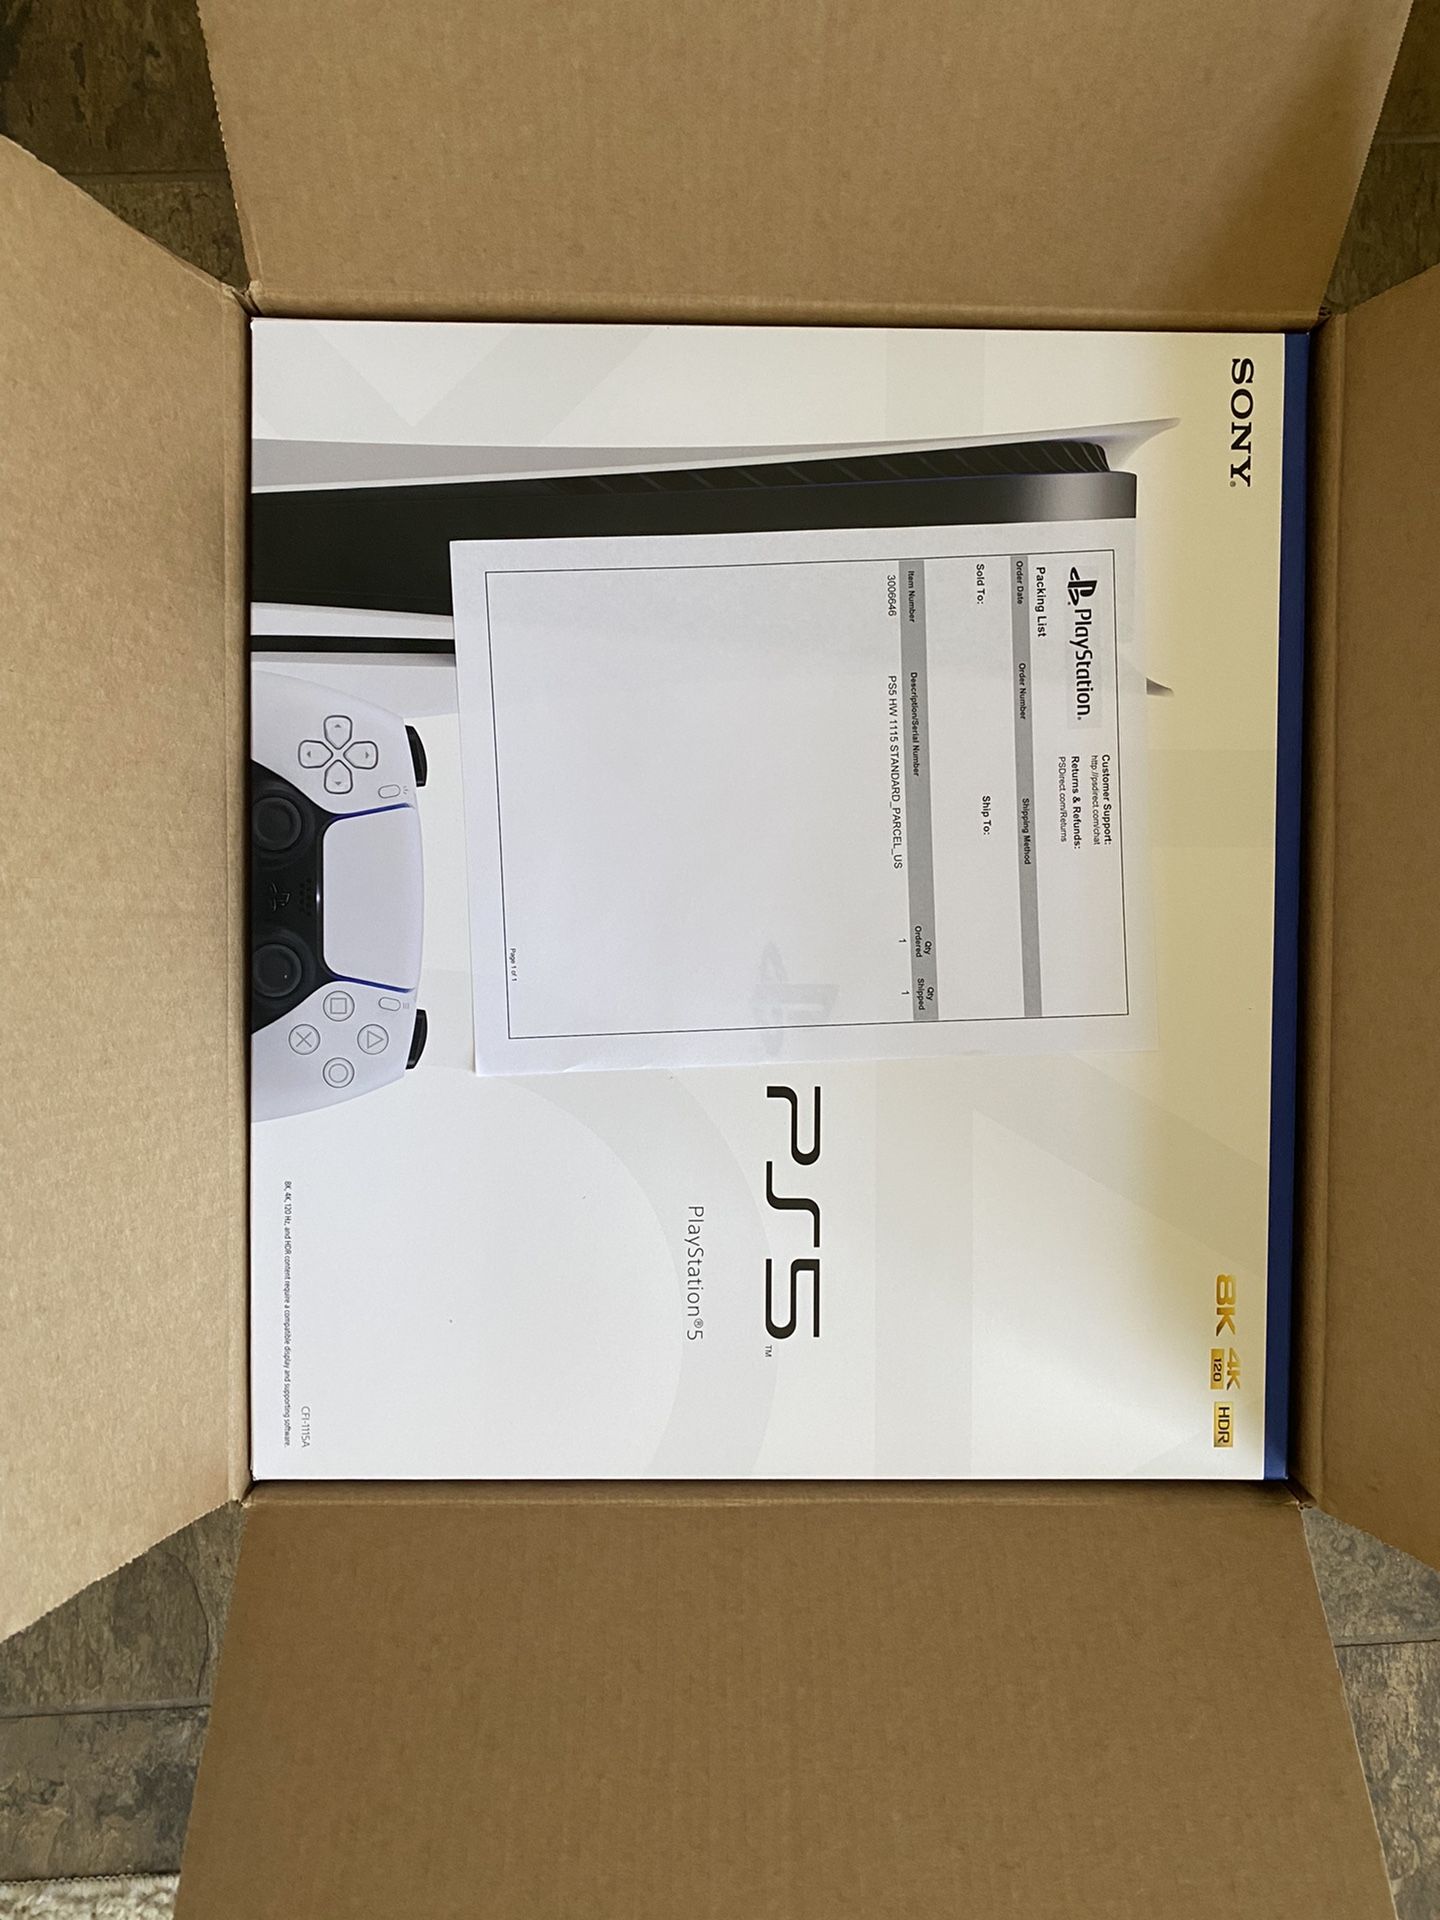 PS5 *UNOPENED*